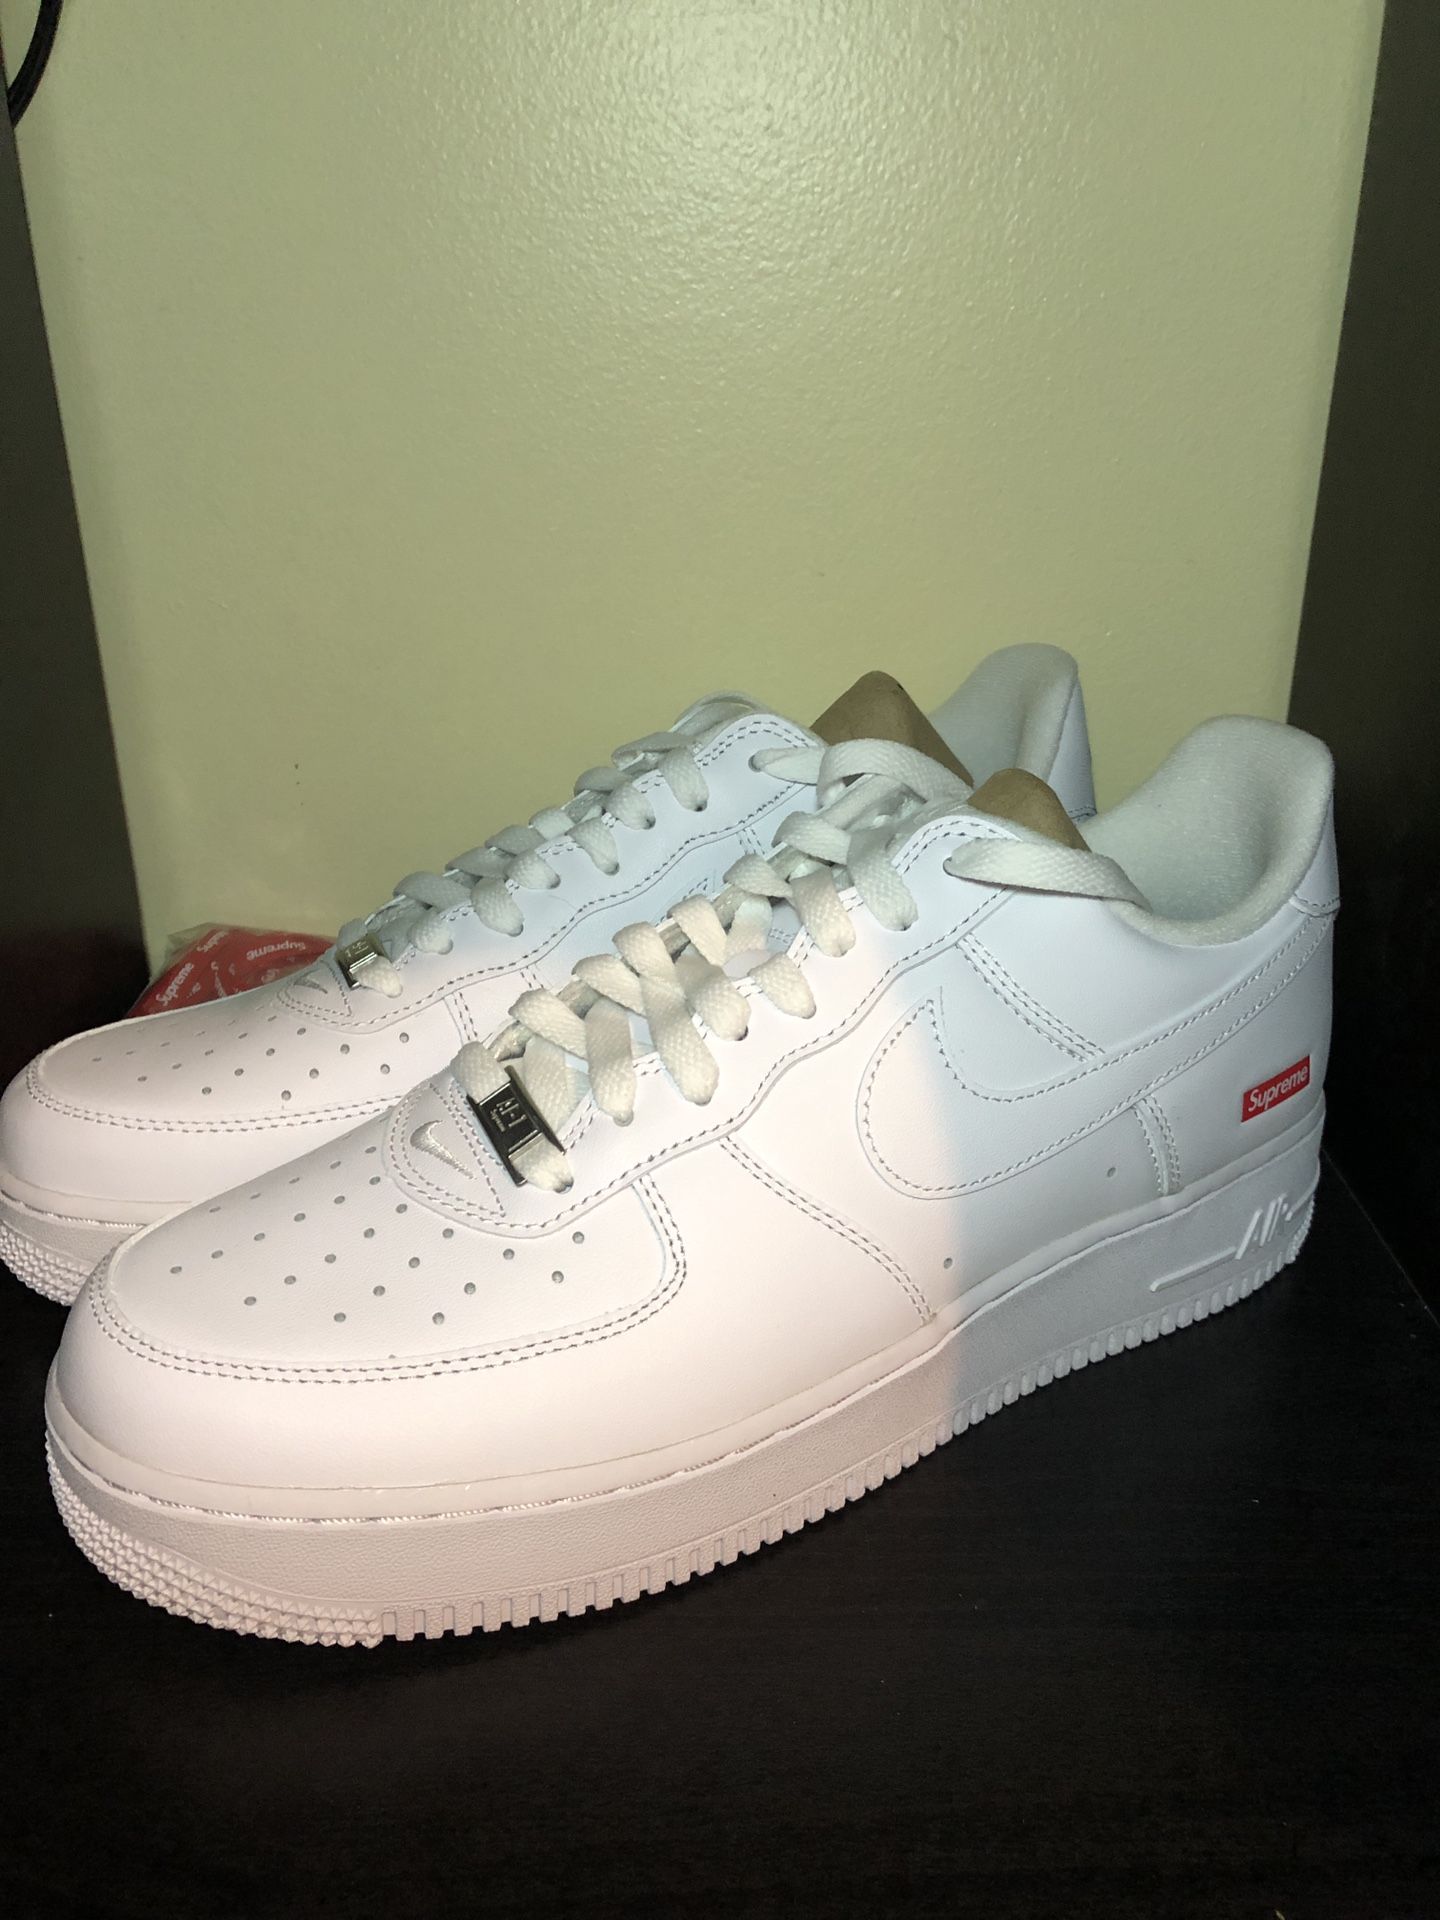 New Supreme Air Force 1 Low Size 9, 10, 10.5, 12